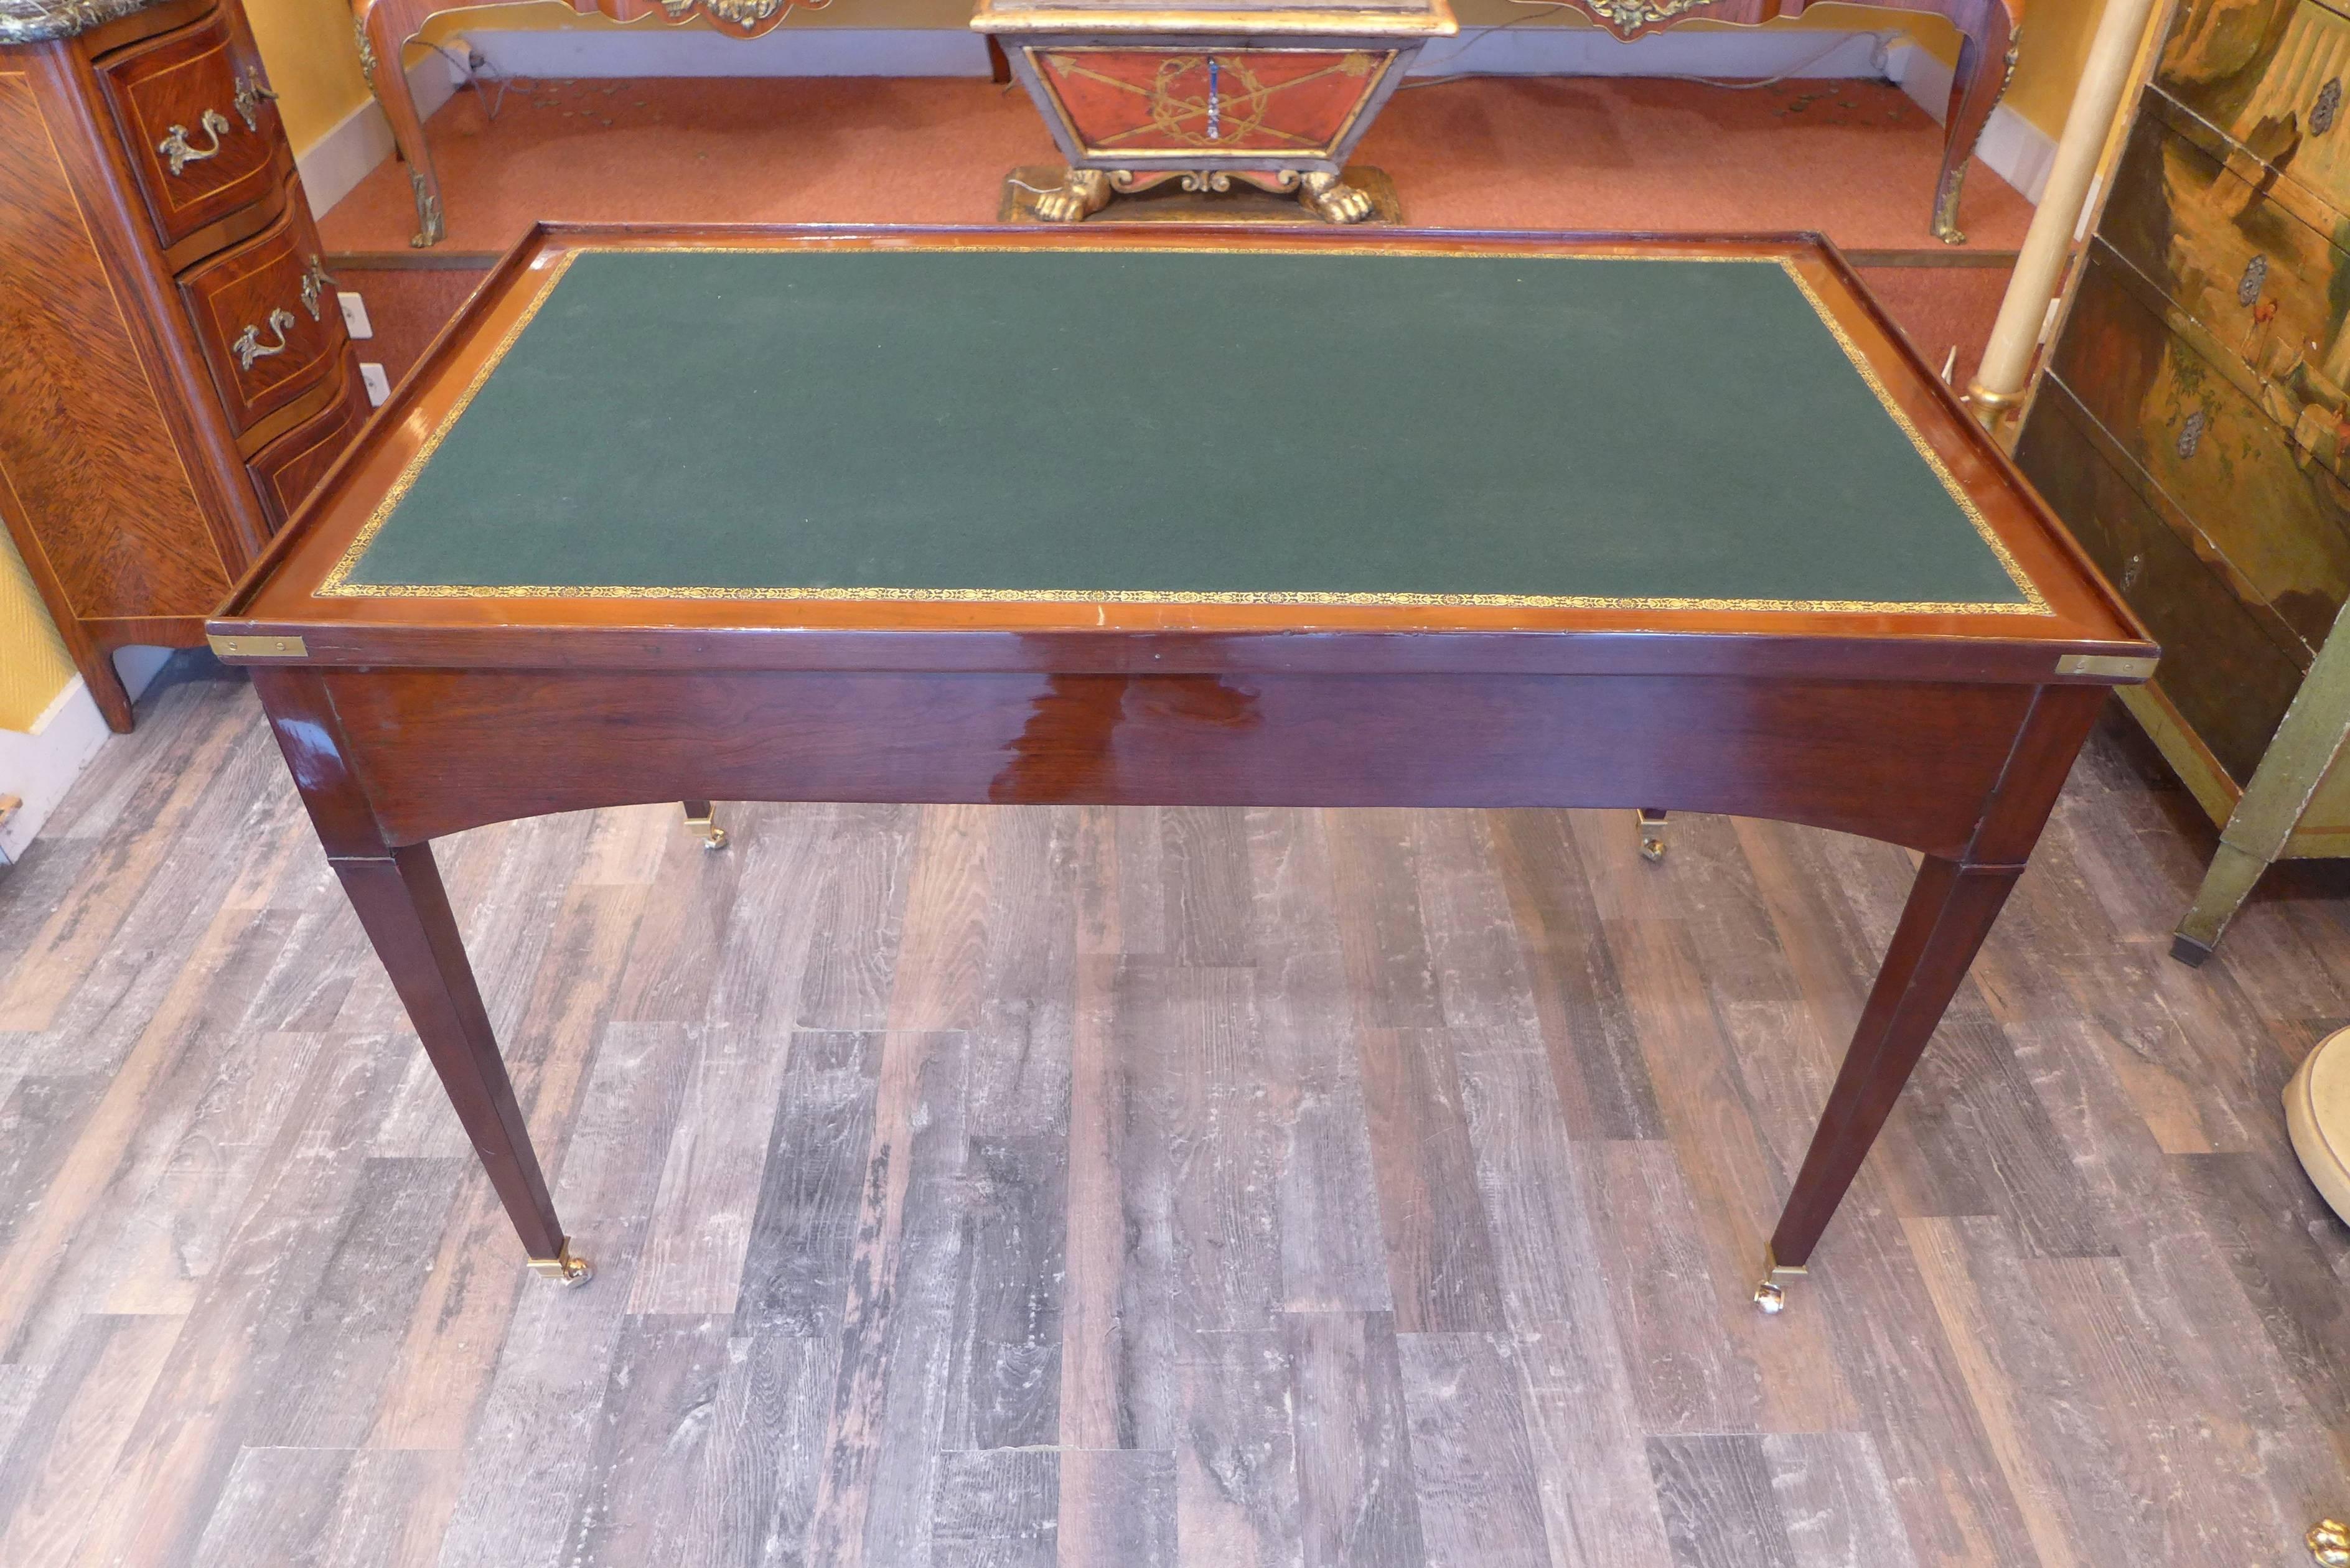 French Directoire Period, circa 1795 Reversible Desk and Tric-Trac Game Table 4